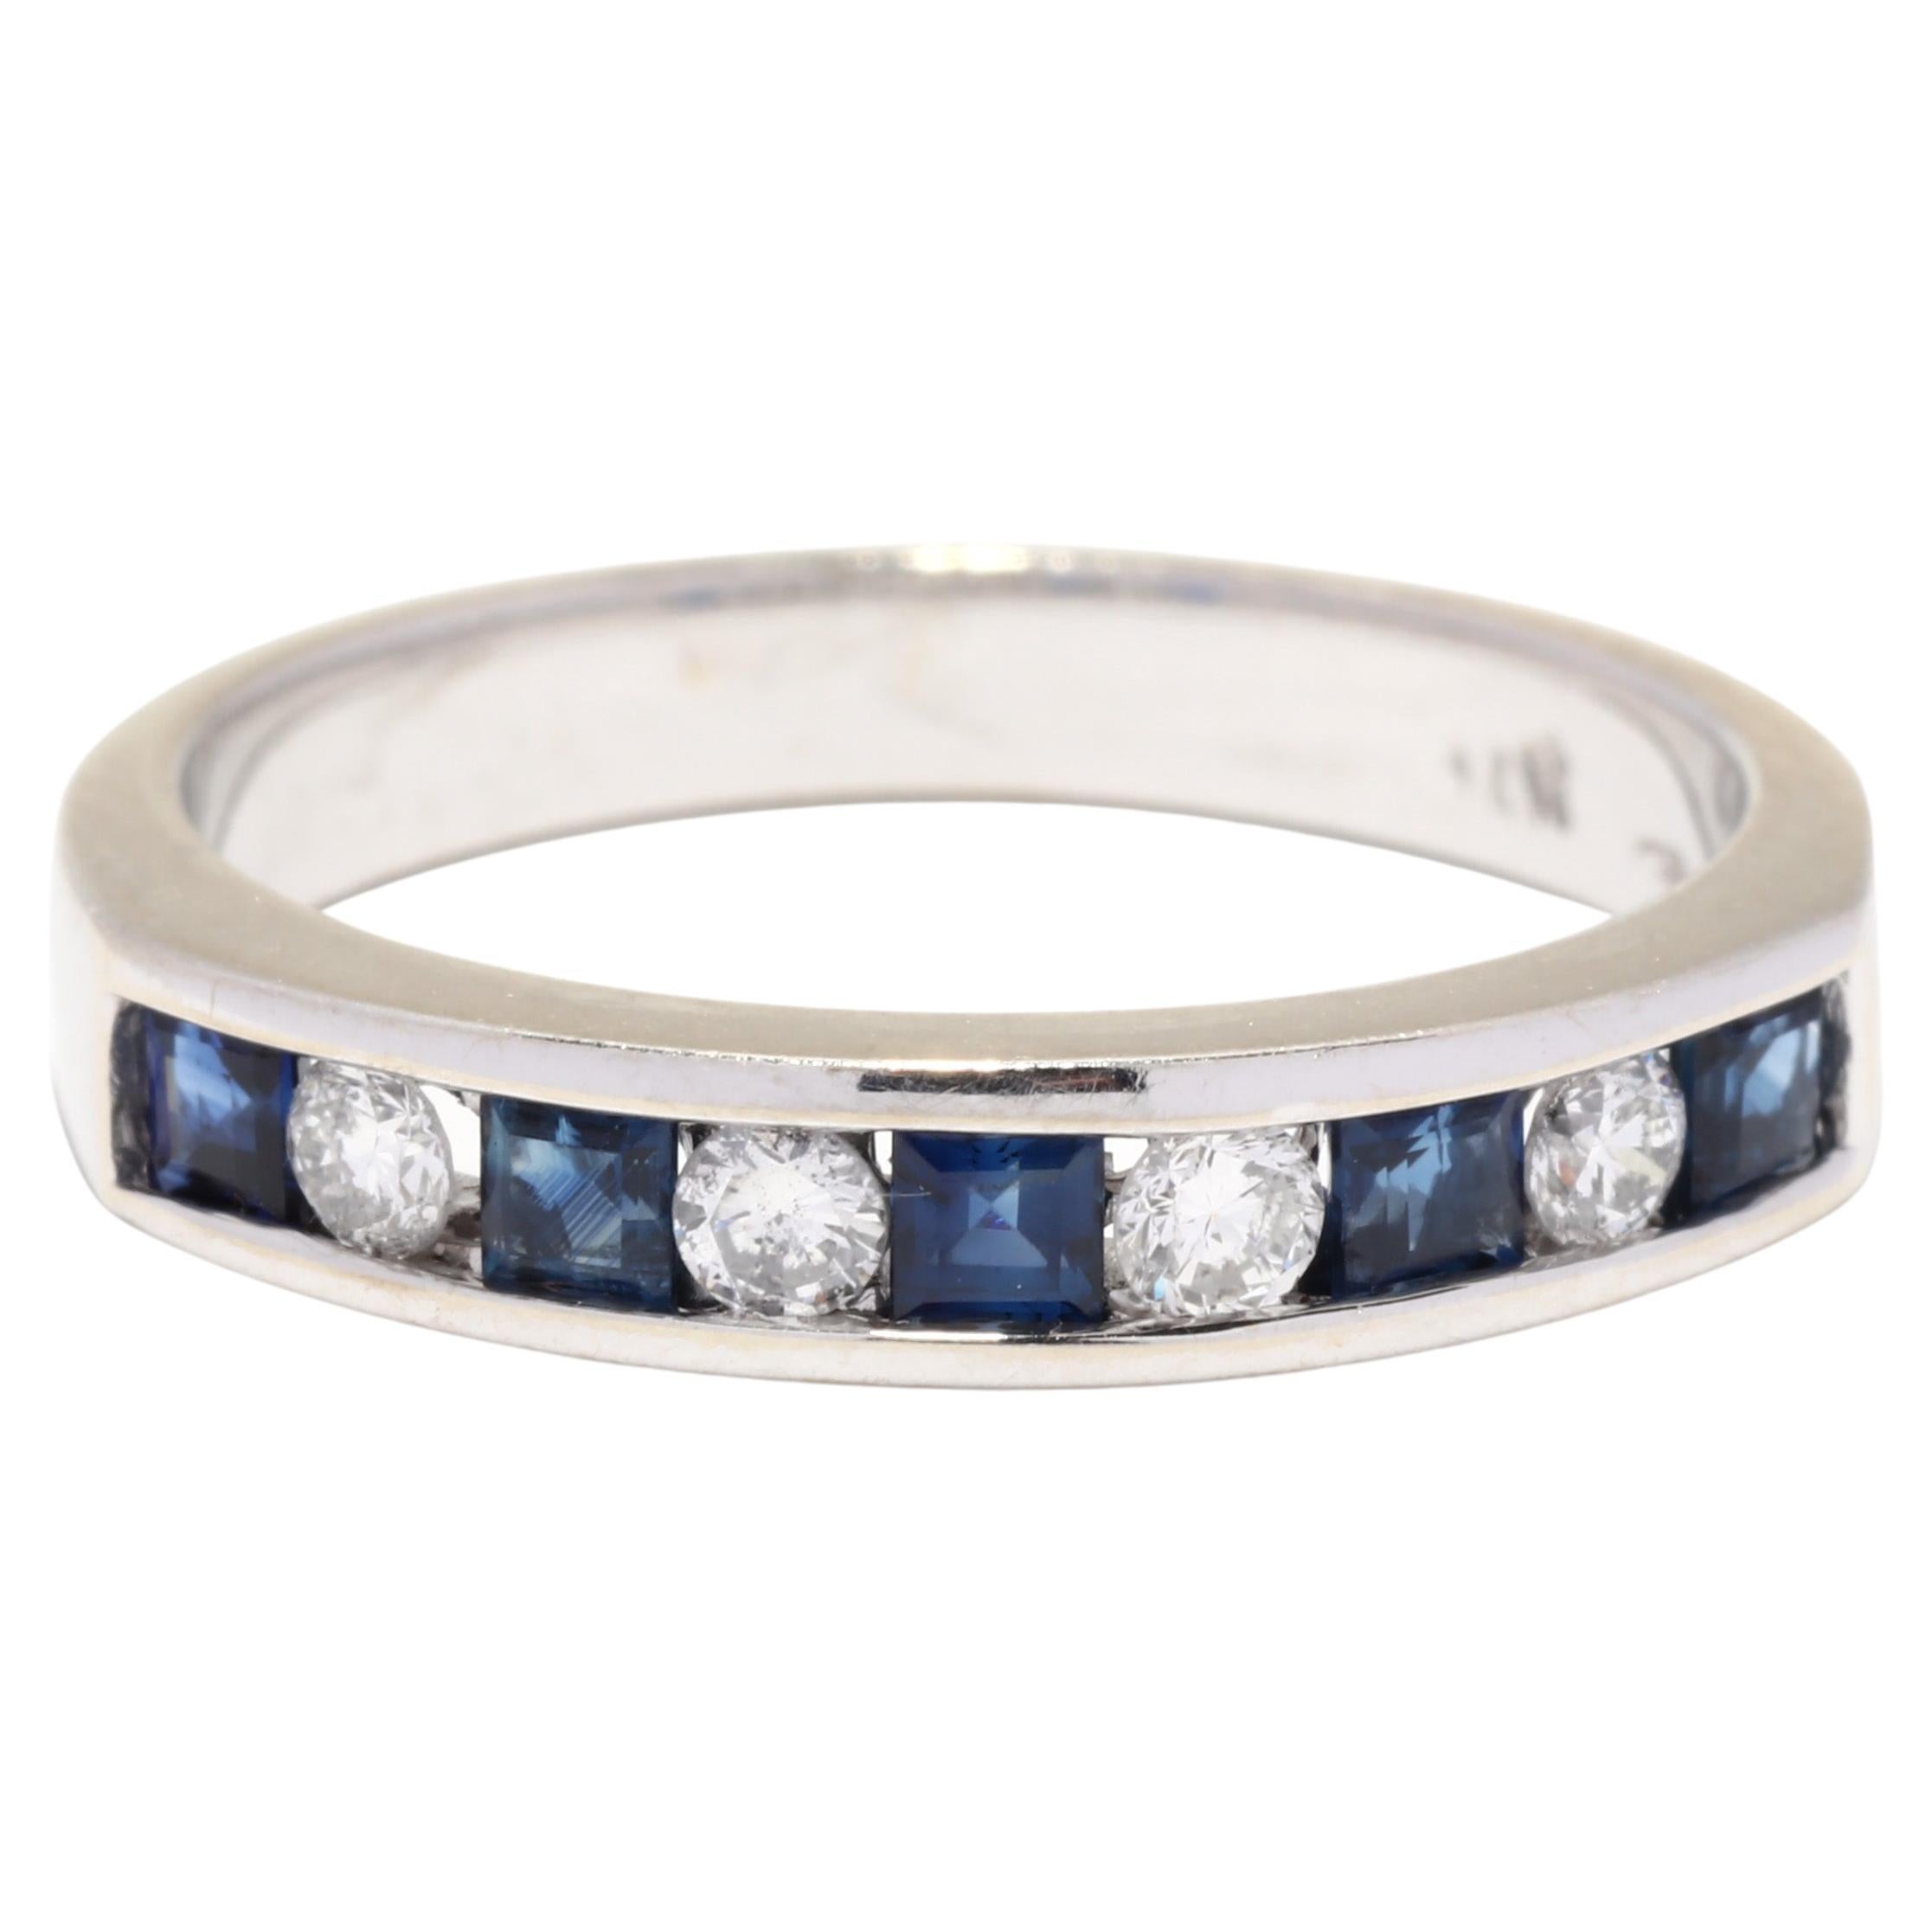 Sapphire Diamond Band, 14K White Gold, Something Blue, Sapphire Stackable Band